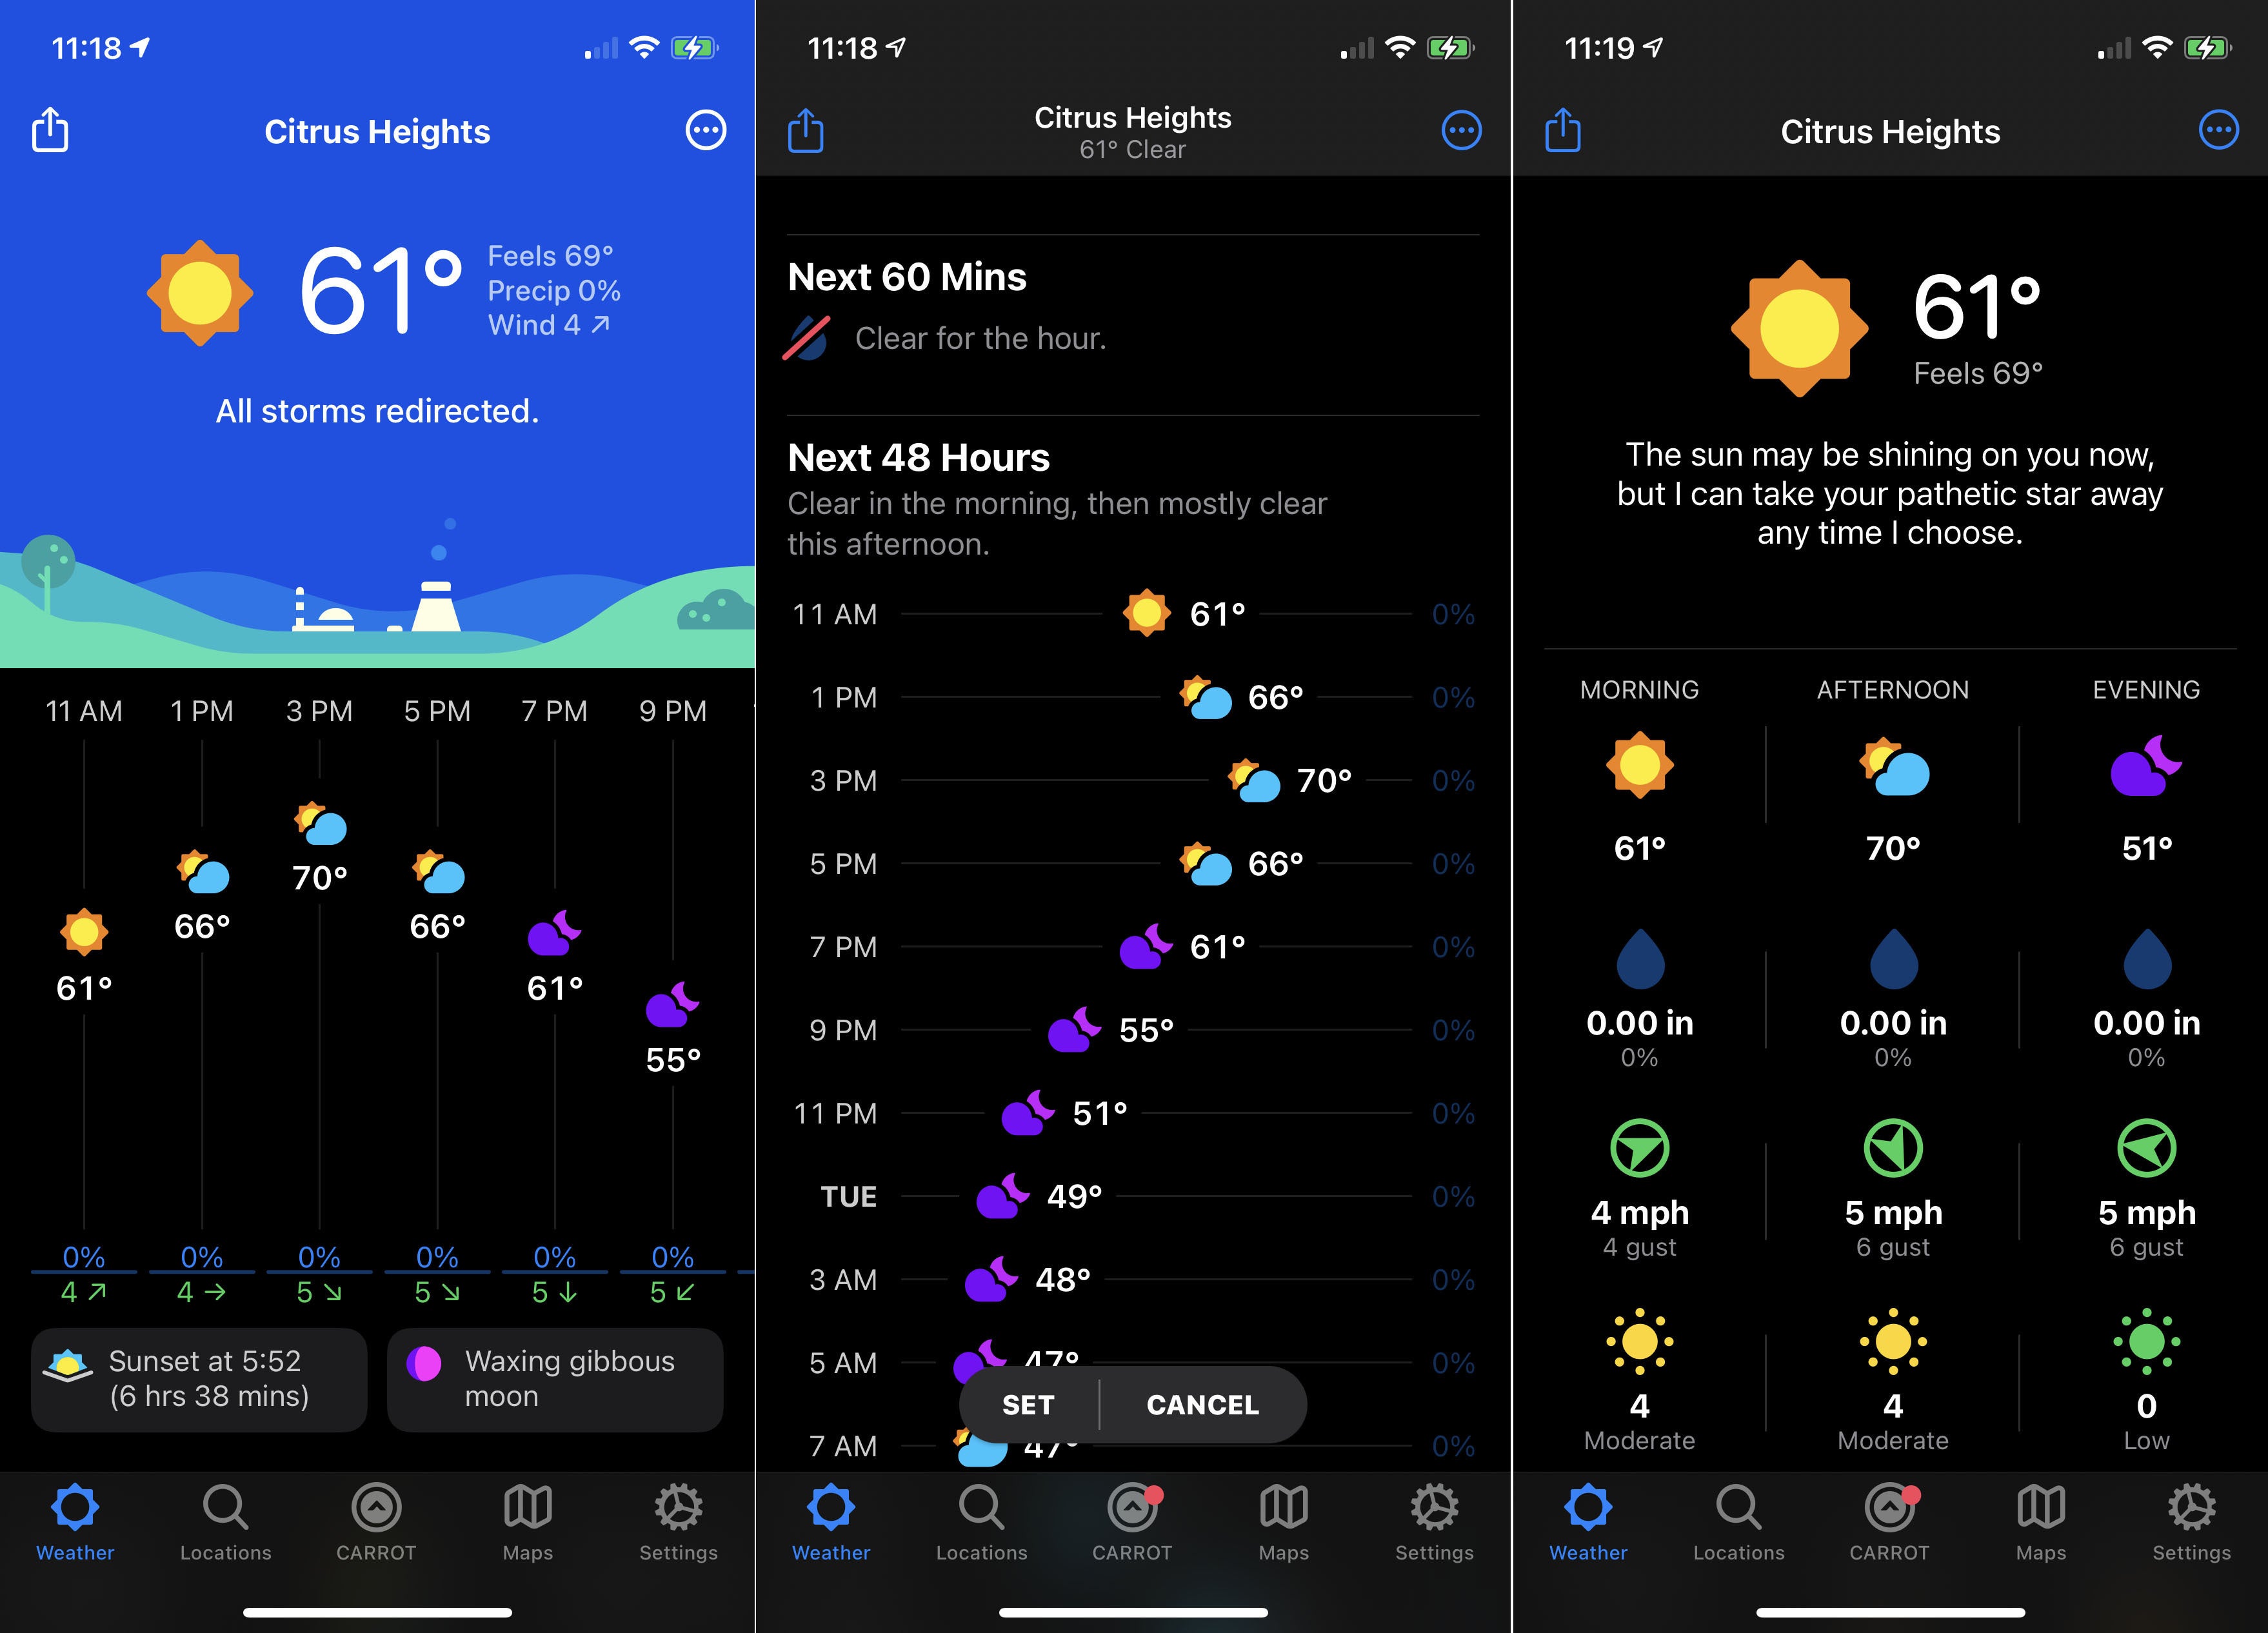 carrot weather app refresh rate